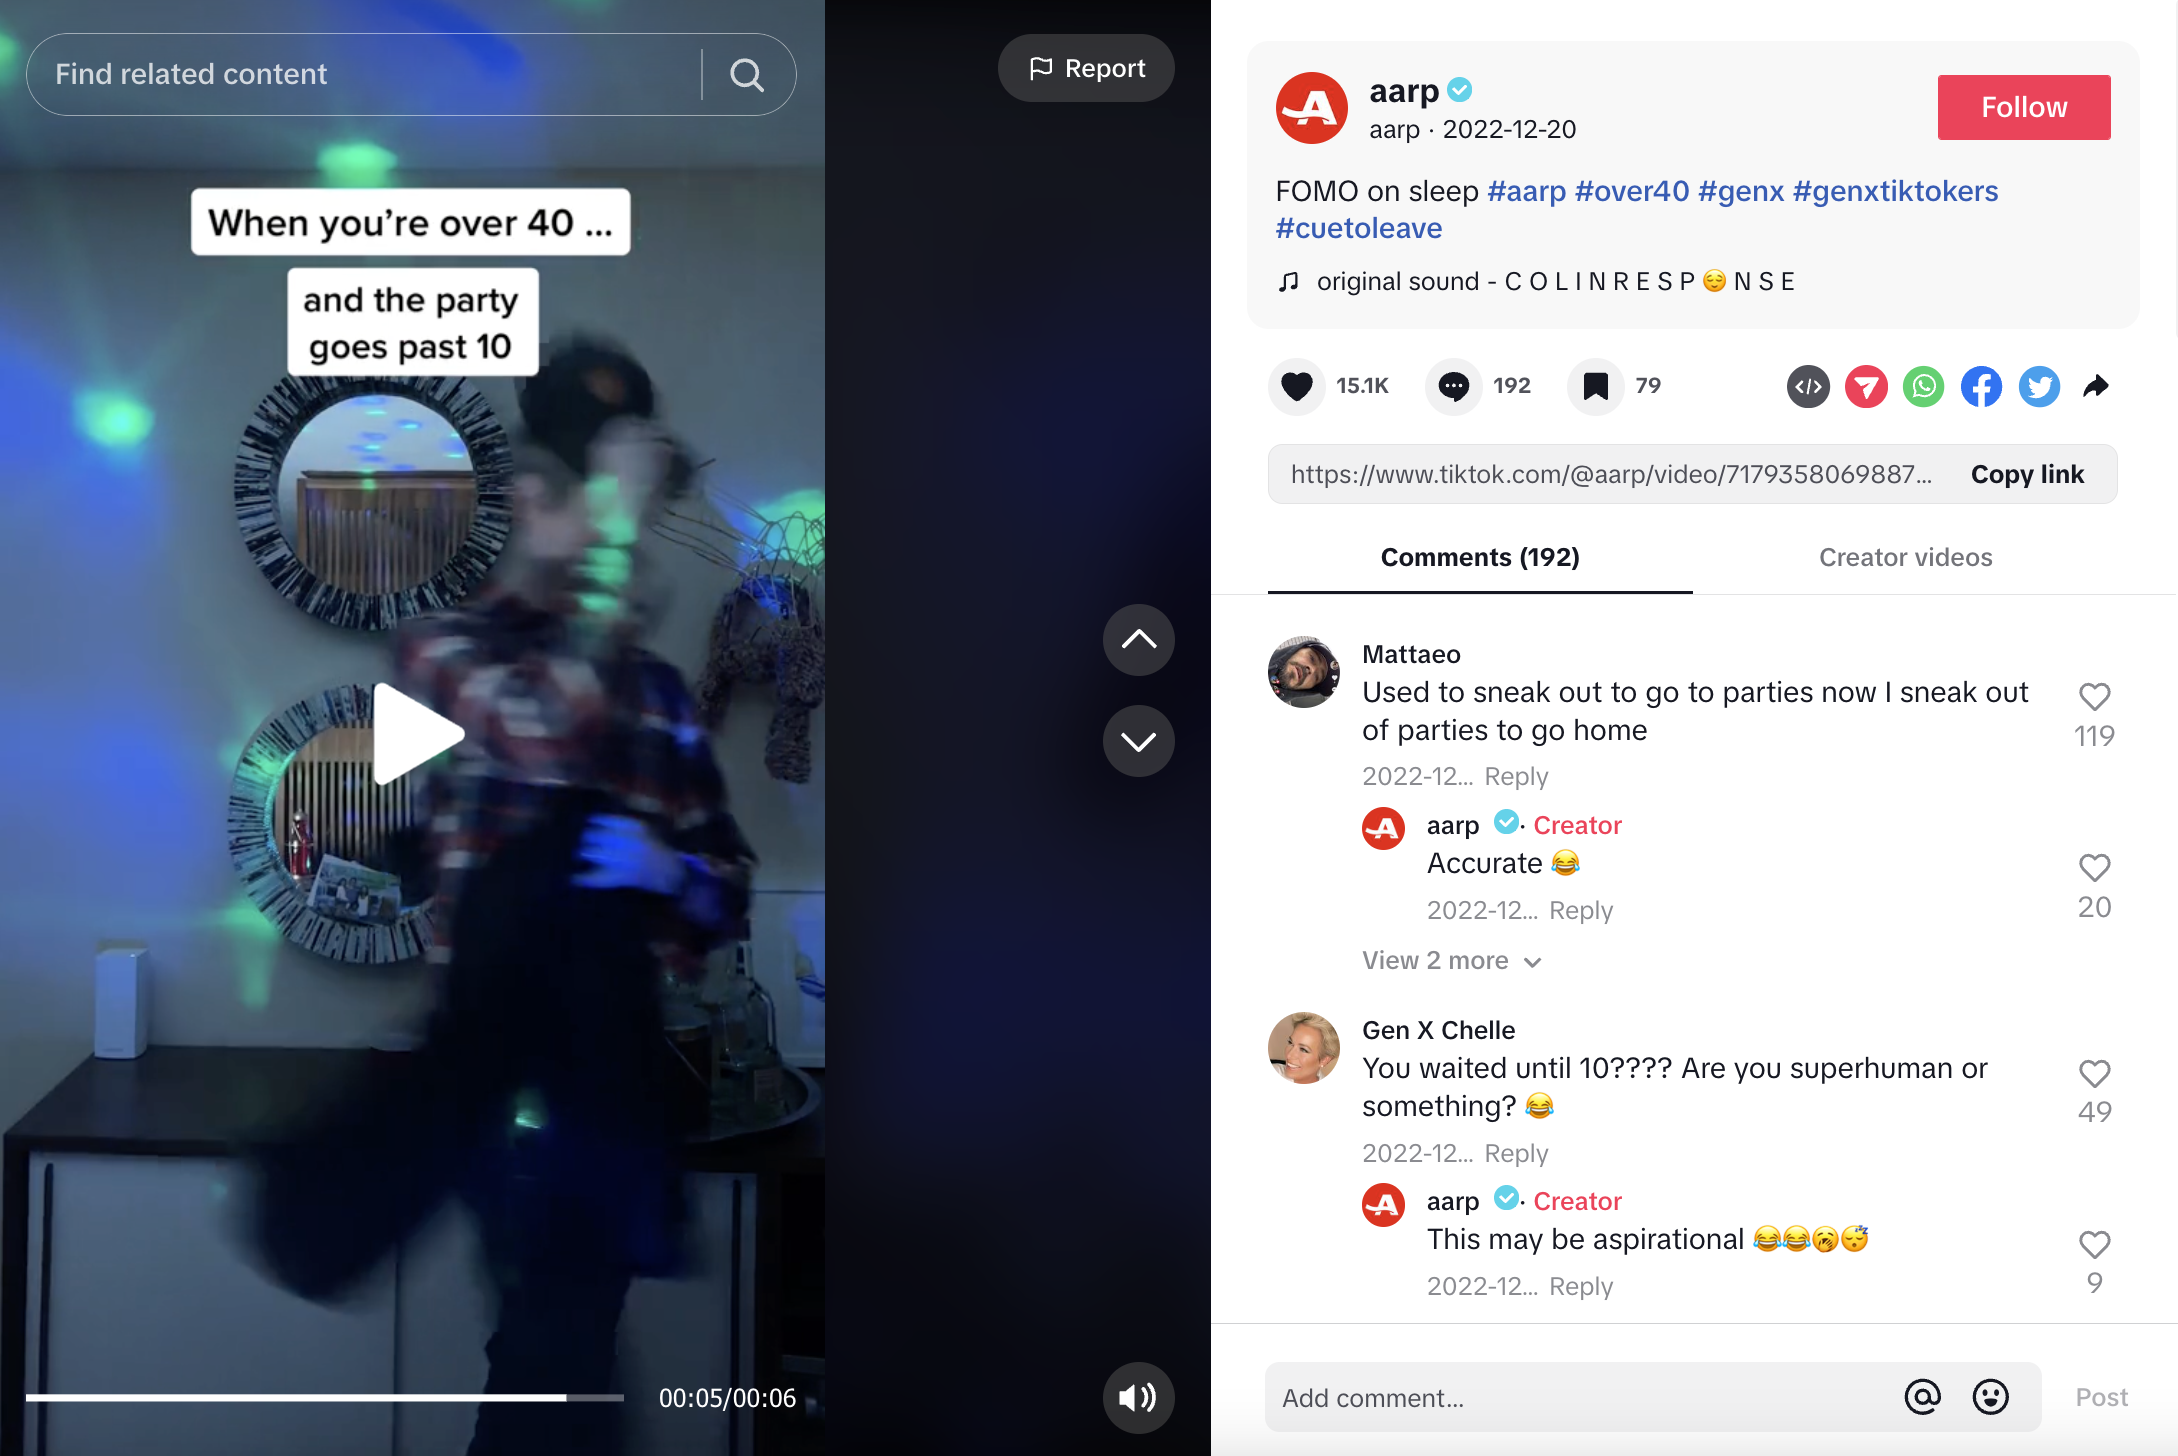 A TikTok video from AARP showing what happens when you're over 40 and the party goes past 10. The creator on screen is shown gathering his items and leaving the party. The caption reads,"FOMO on sleep #aarp #over40 #genx #genxtiktokers #cuetoleave."